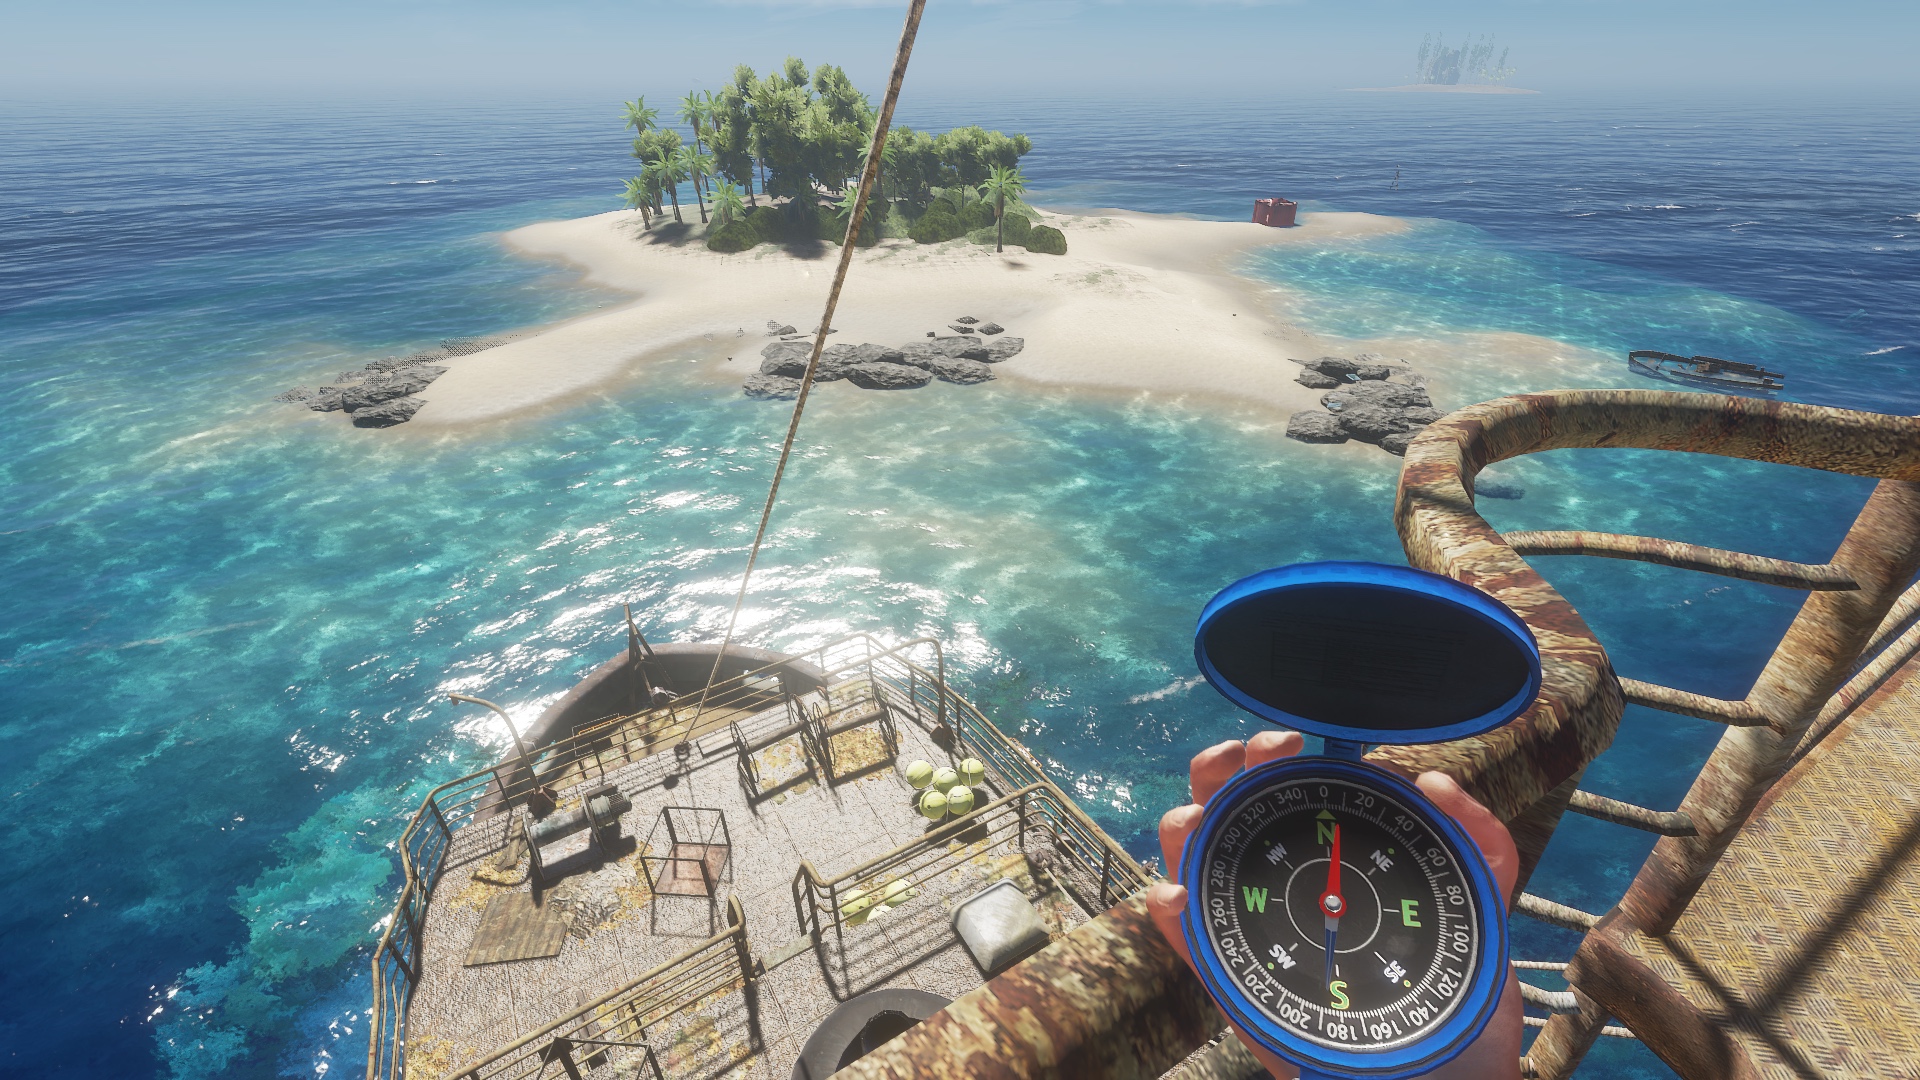 Stranded Deep PC Free Download Full Version - Gaming Beasts